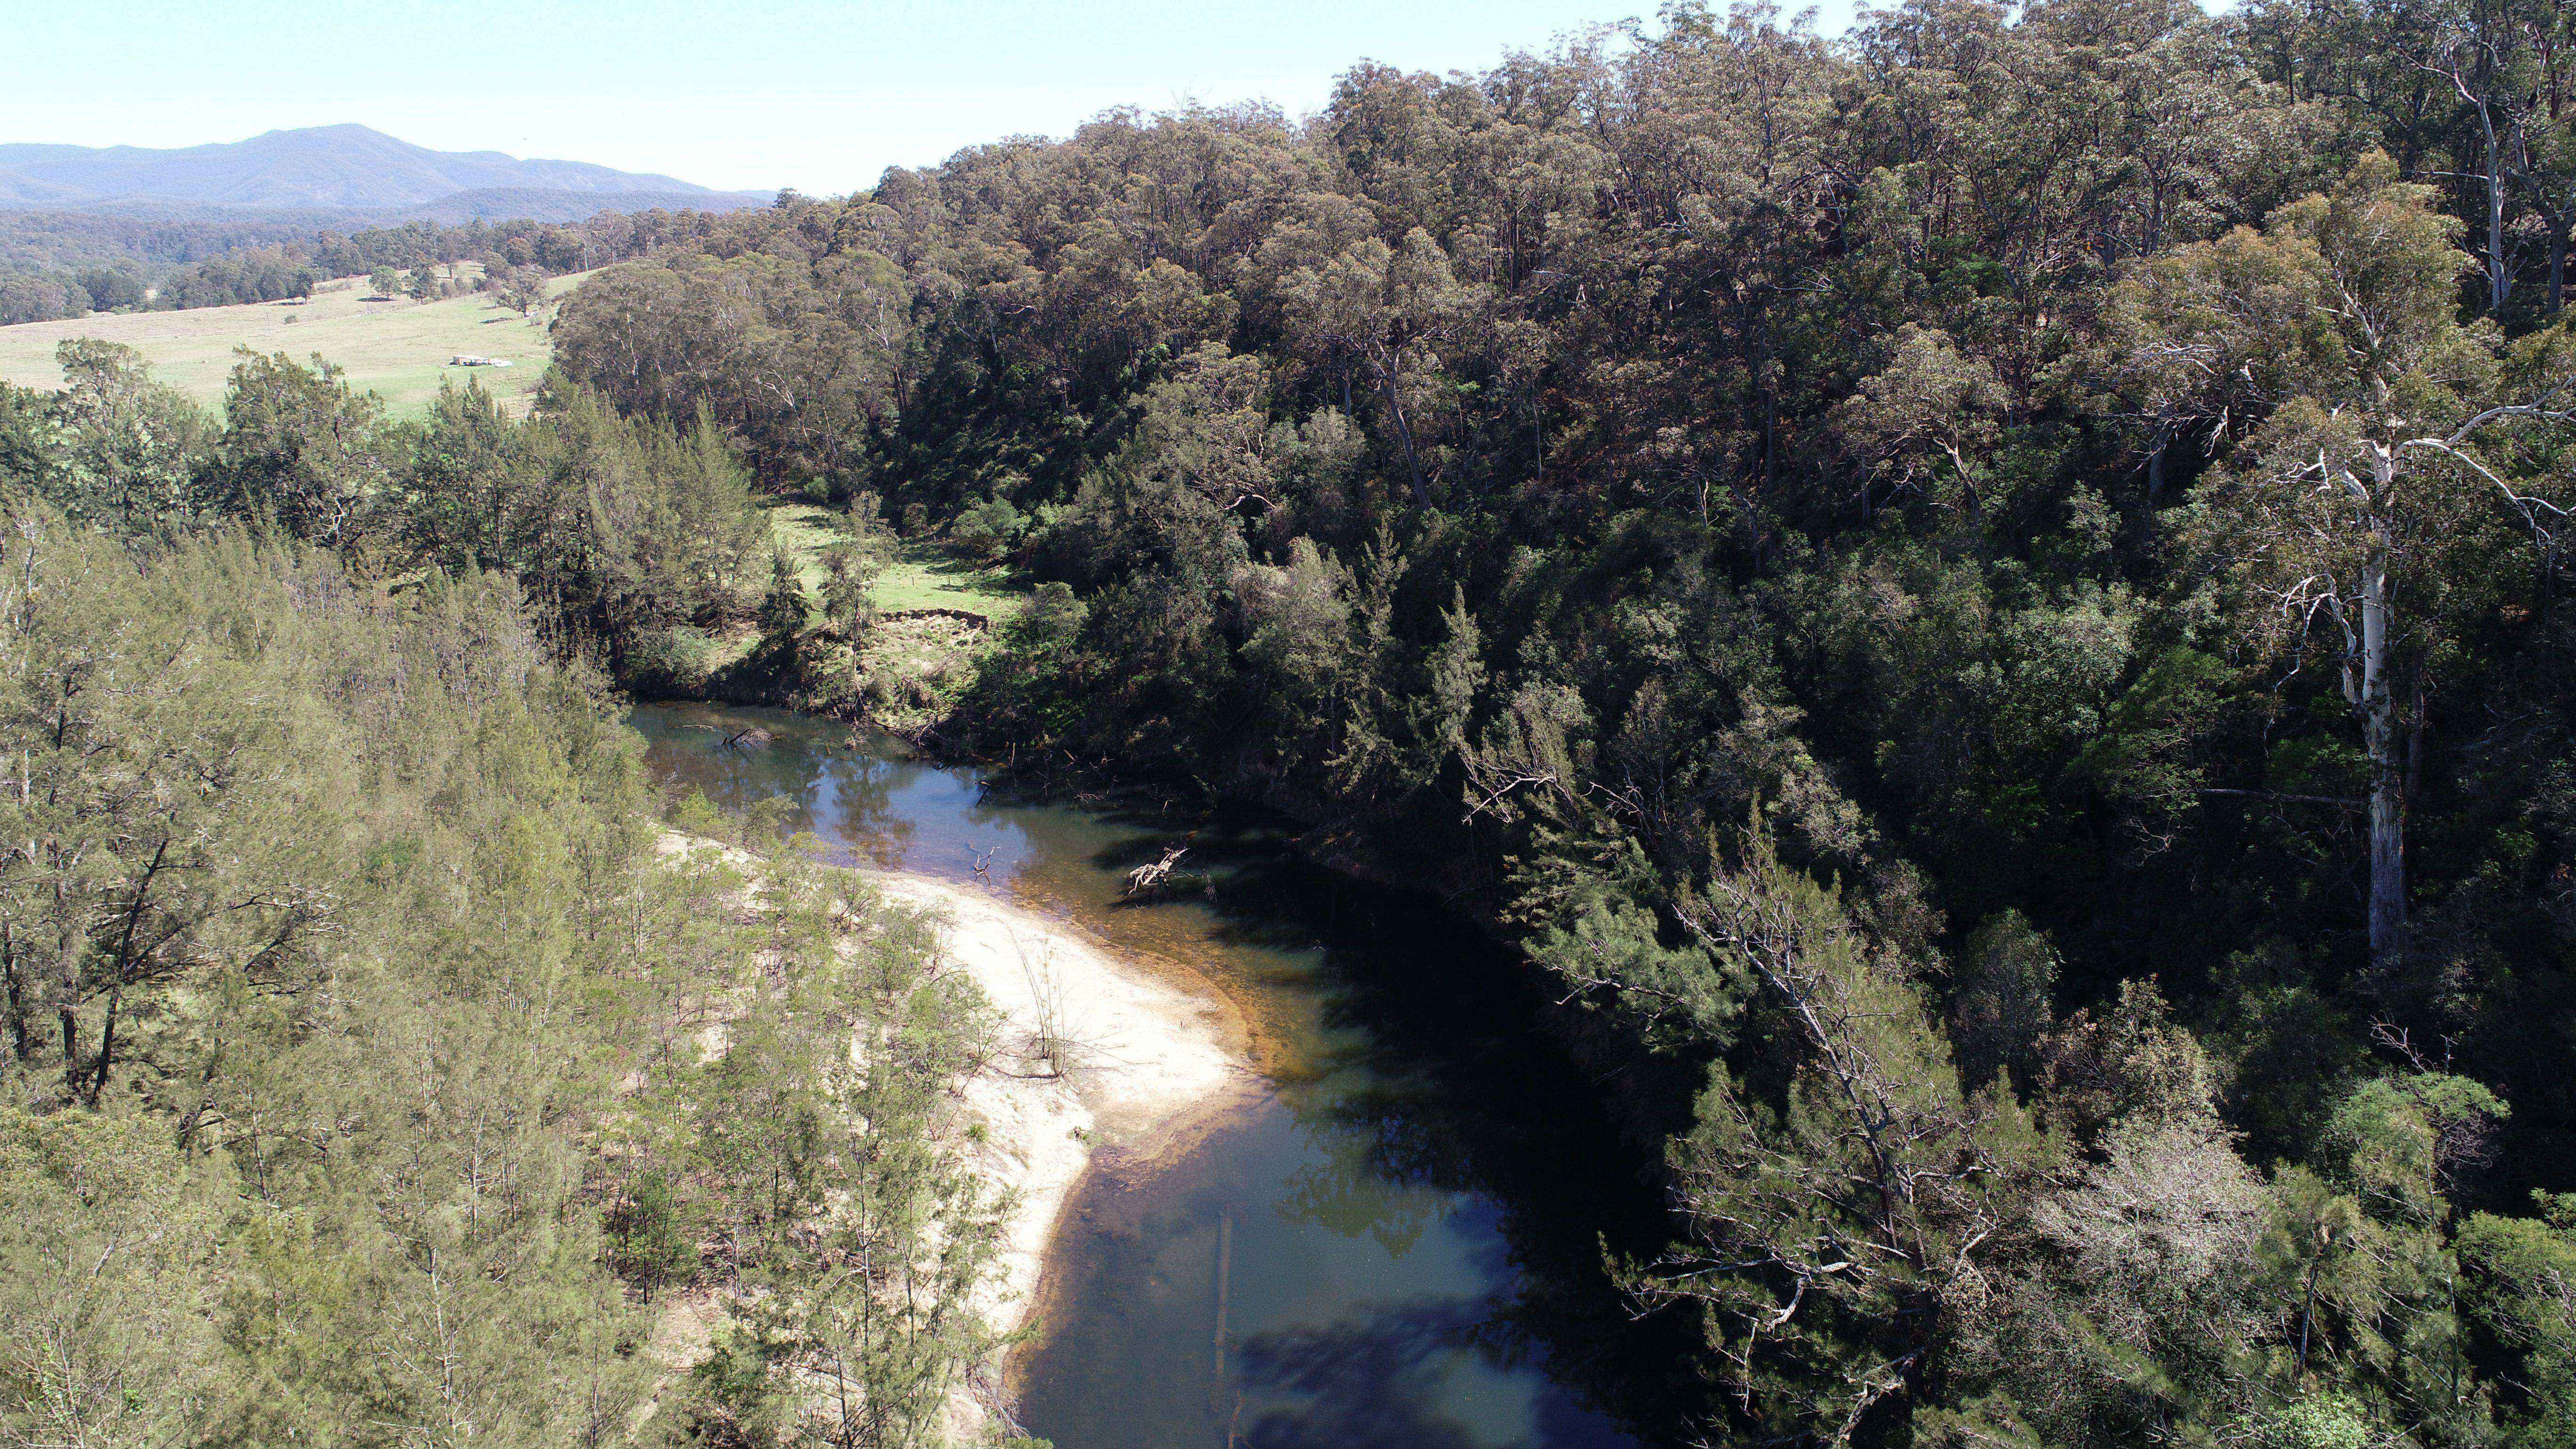 Eurobodalla to go to Level 2 water restrictions on December 1